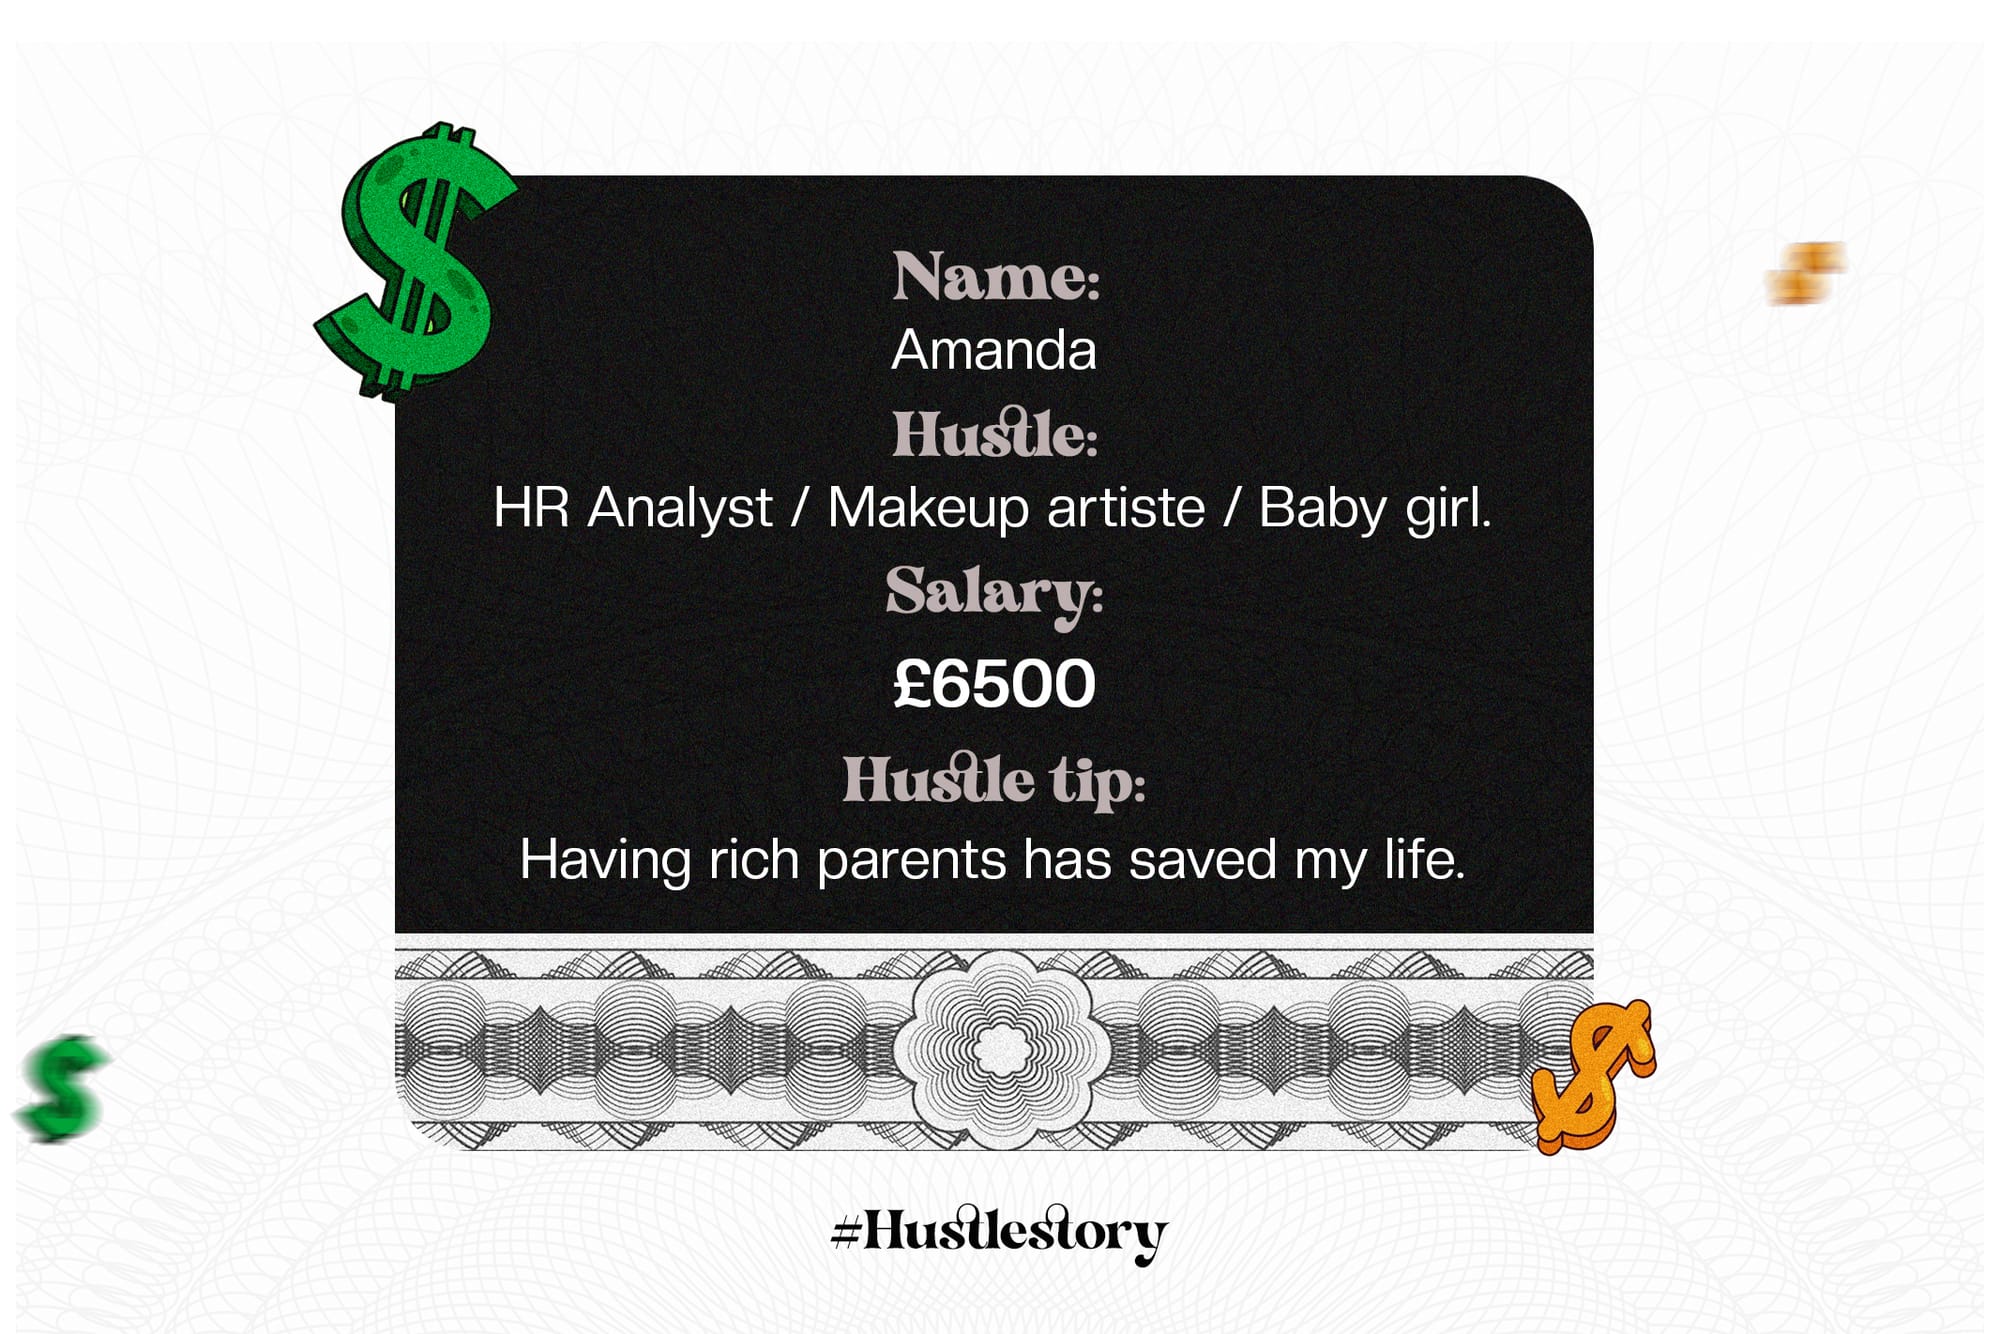 #HustleStory: From Earning £2,800/month in the UK to Earning Over  £6,500 in Less Than 2 Years.